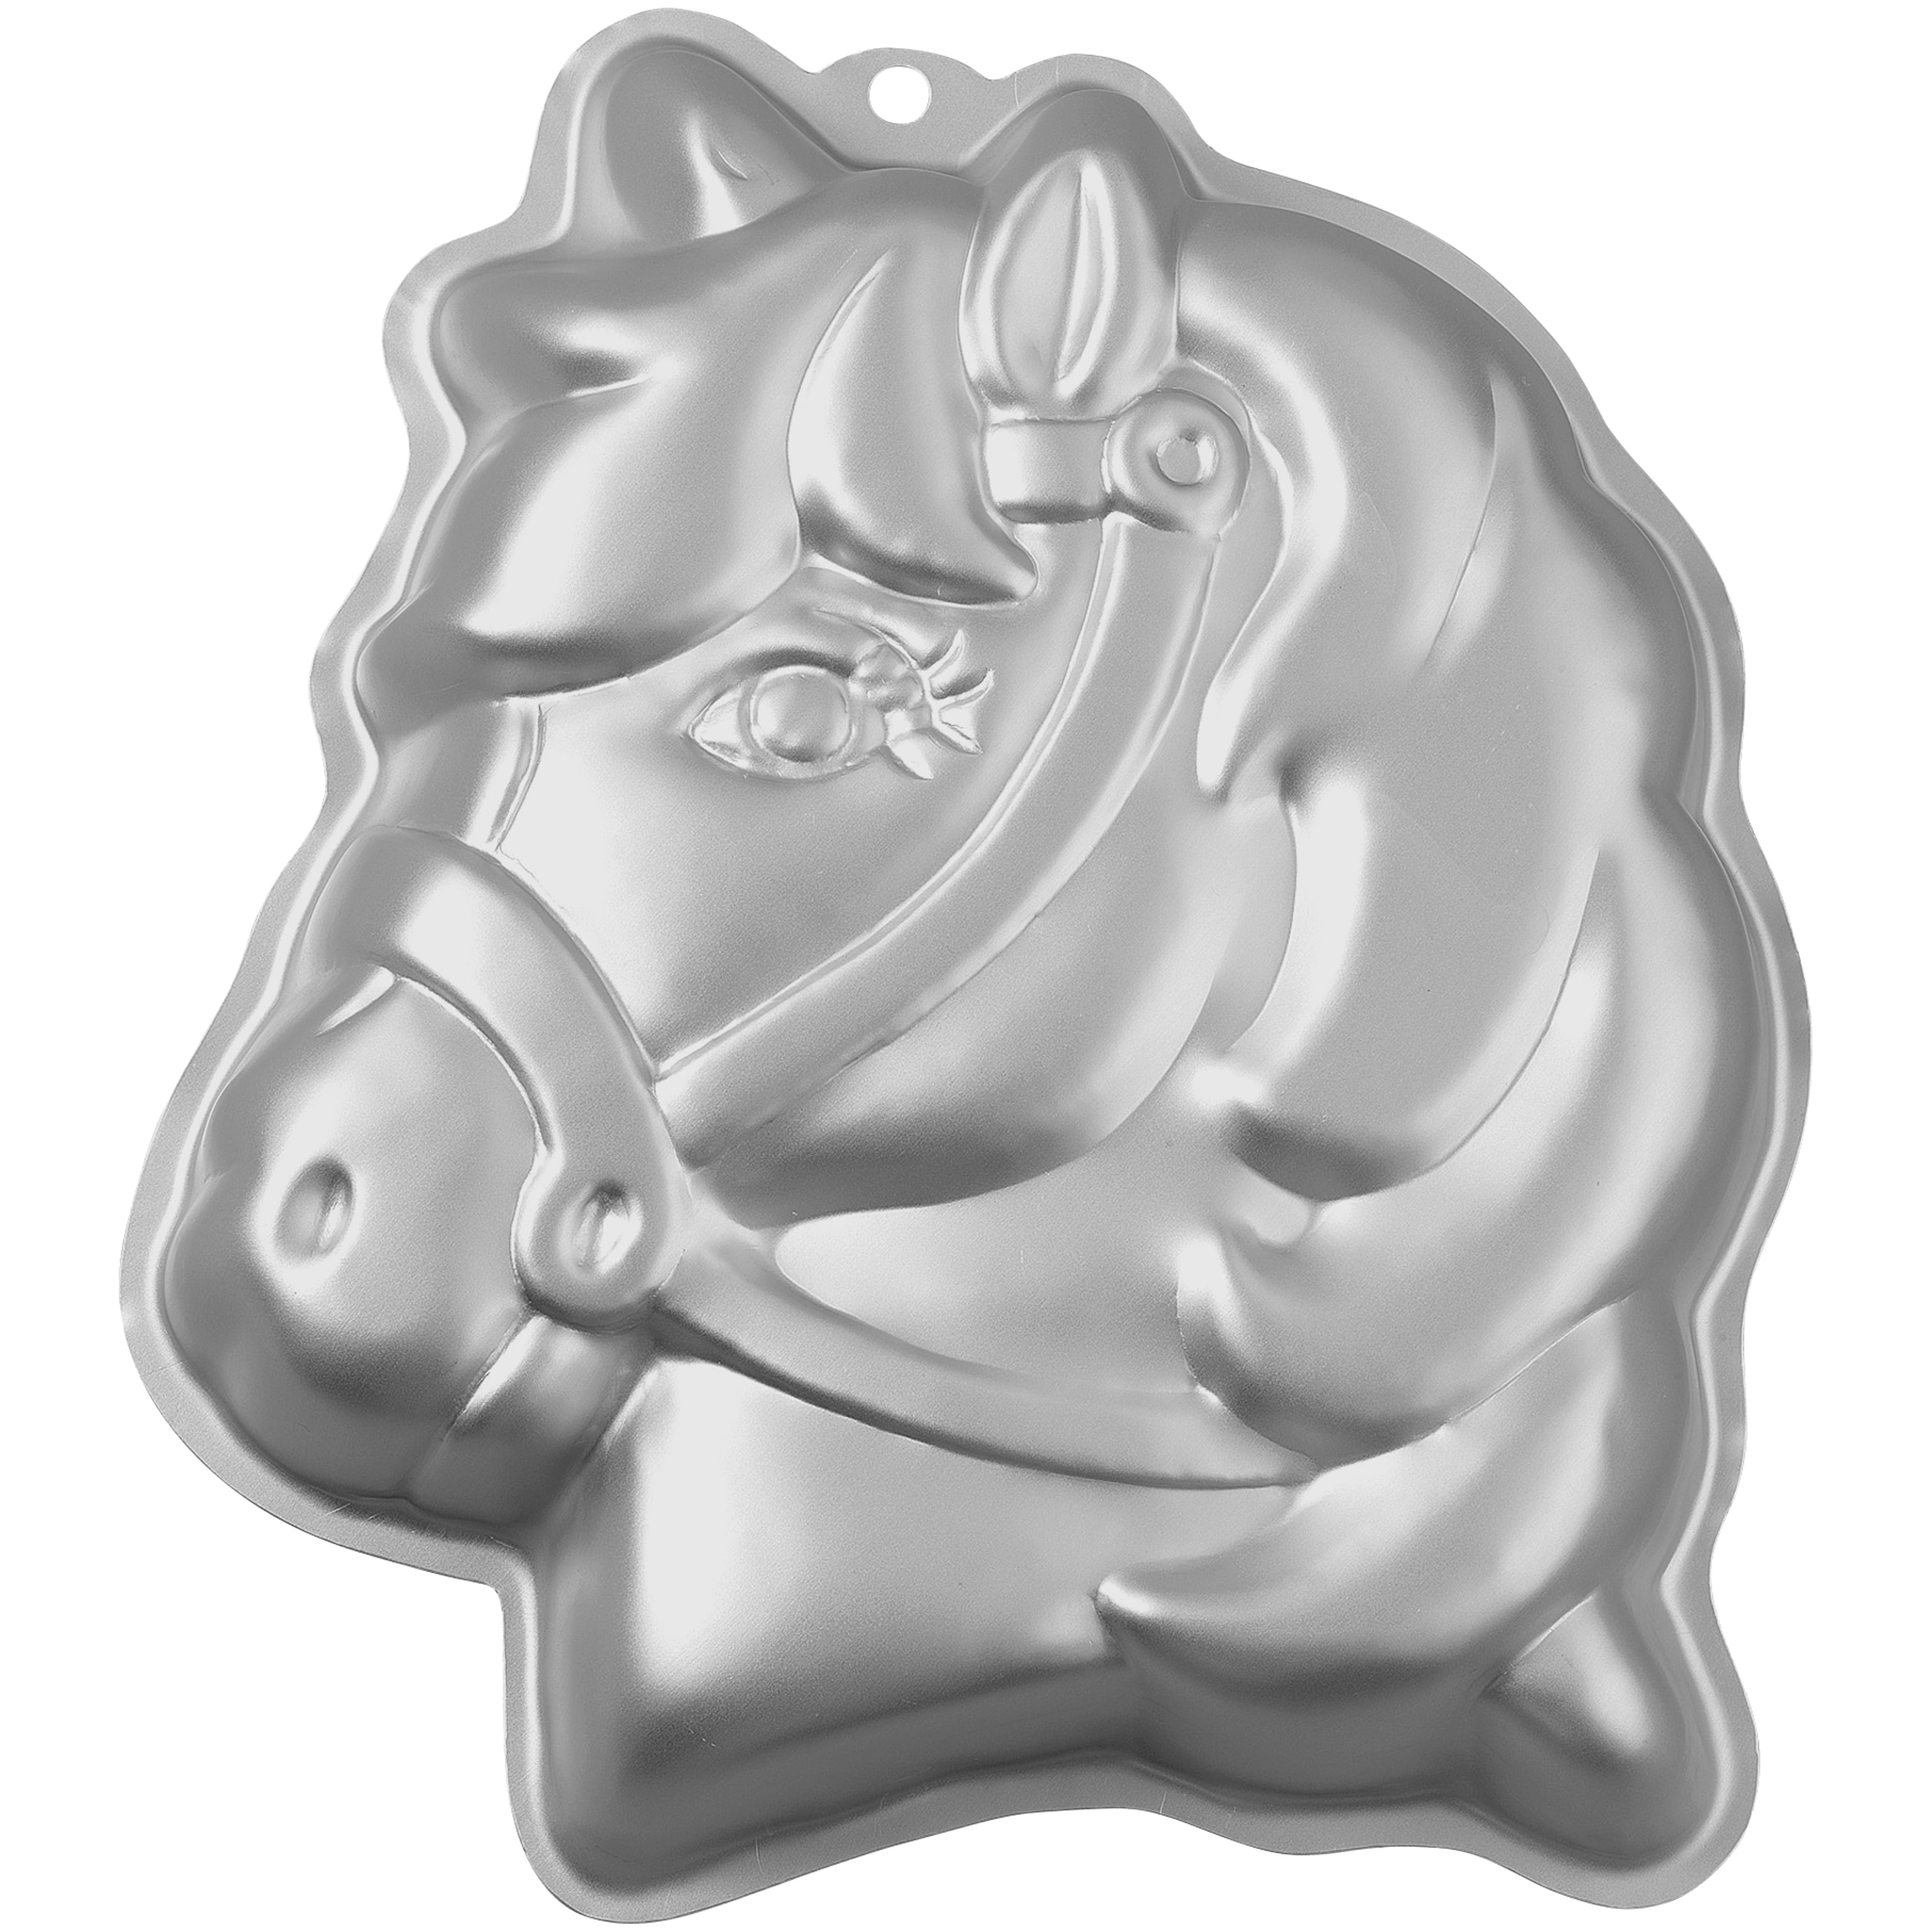 Mujiang 3D Horse Silicone Mold Flying Horse Fondant Molds For Cake  Decorating Candy Chocolate Gum Paste Set Of 4 : Amazon.ca: Home